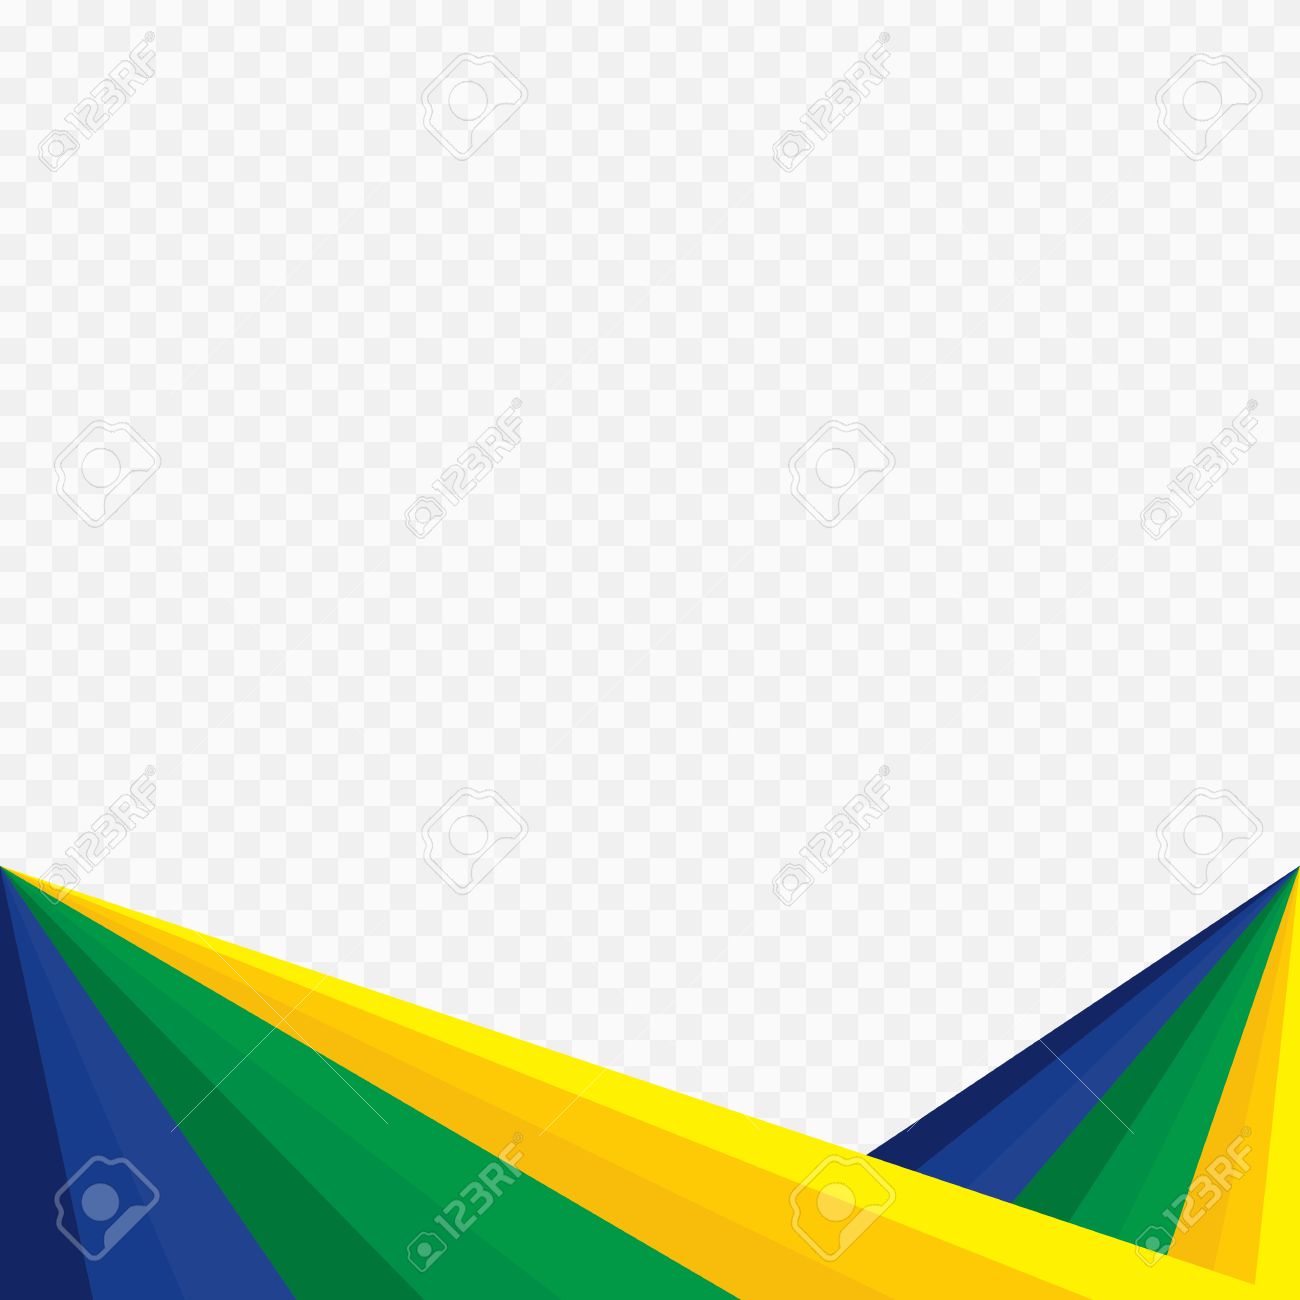 Abstract Green Yellow Blue Geometric Design Template Background